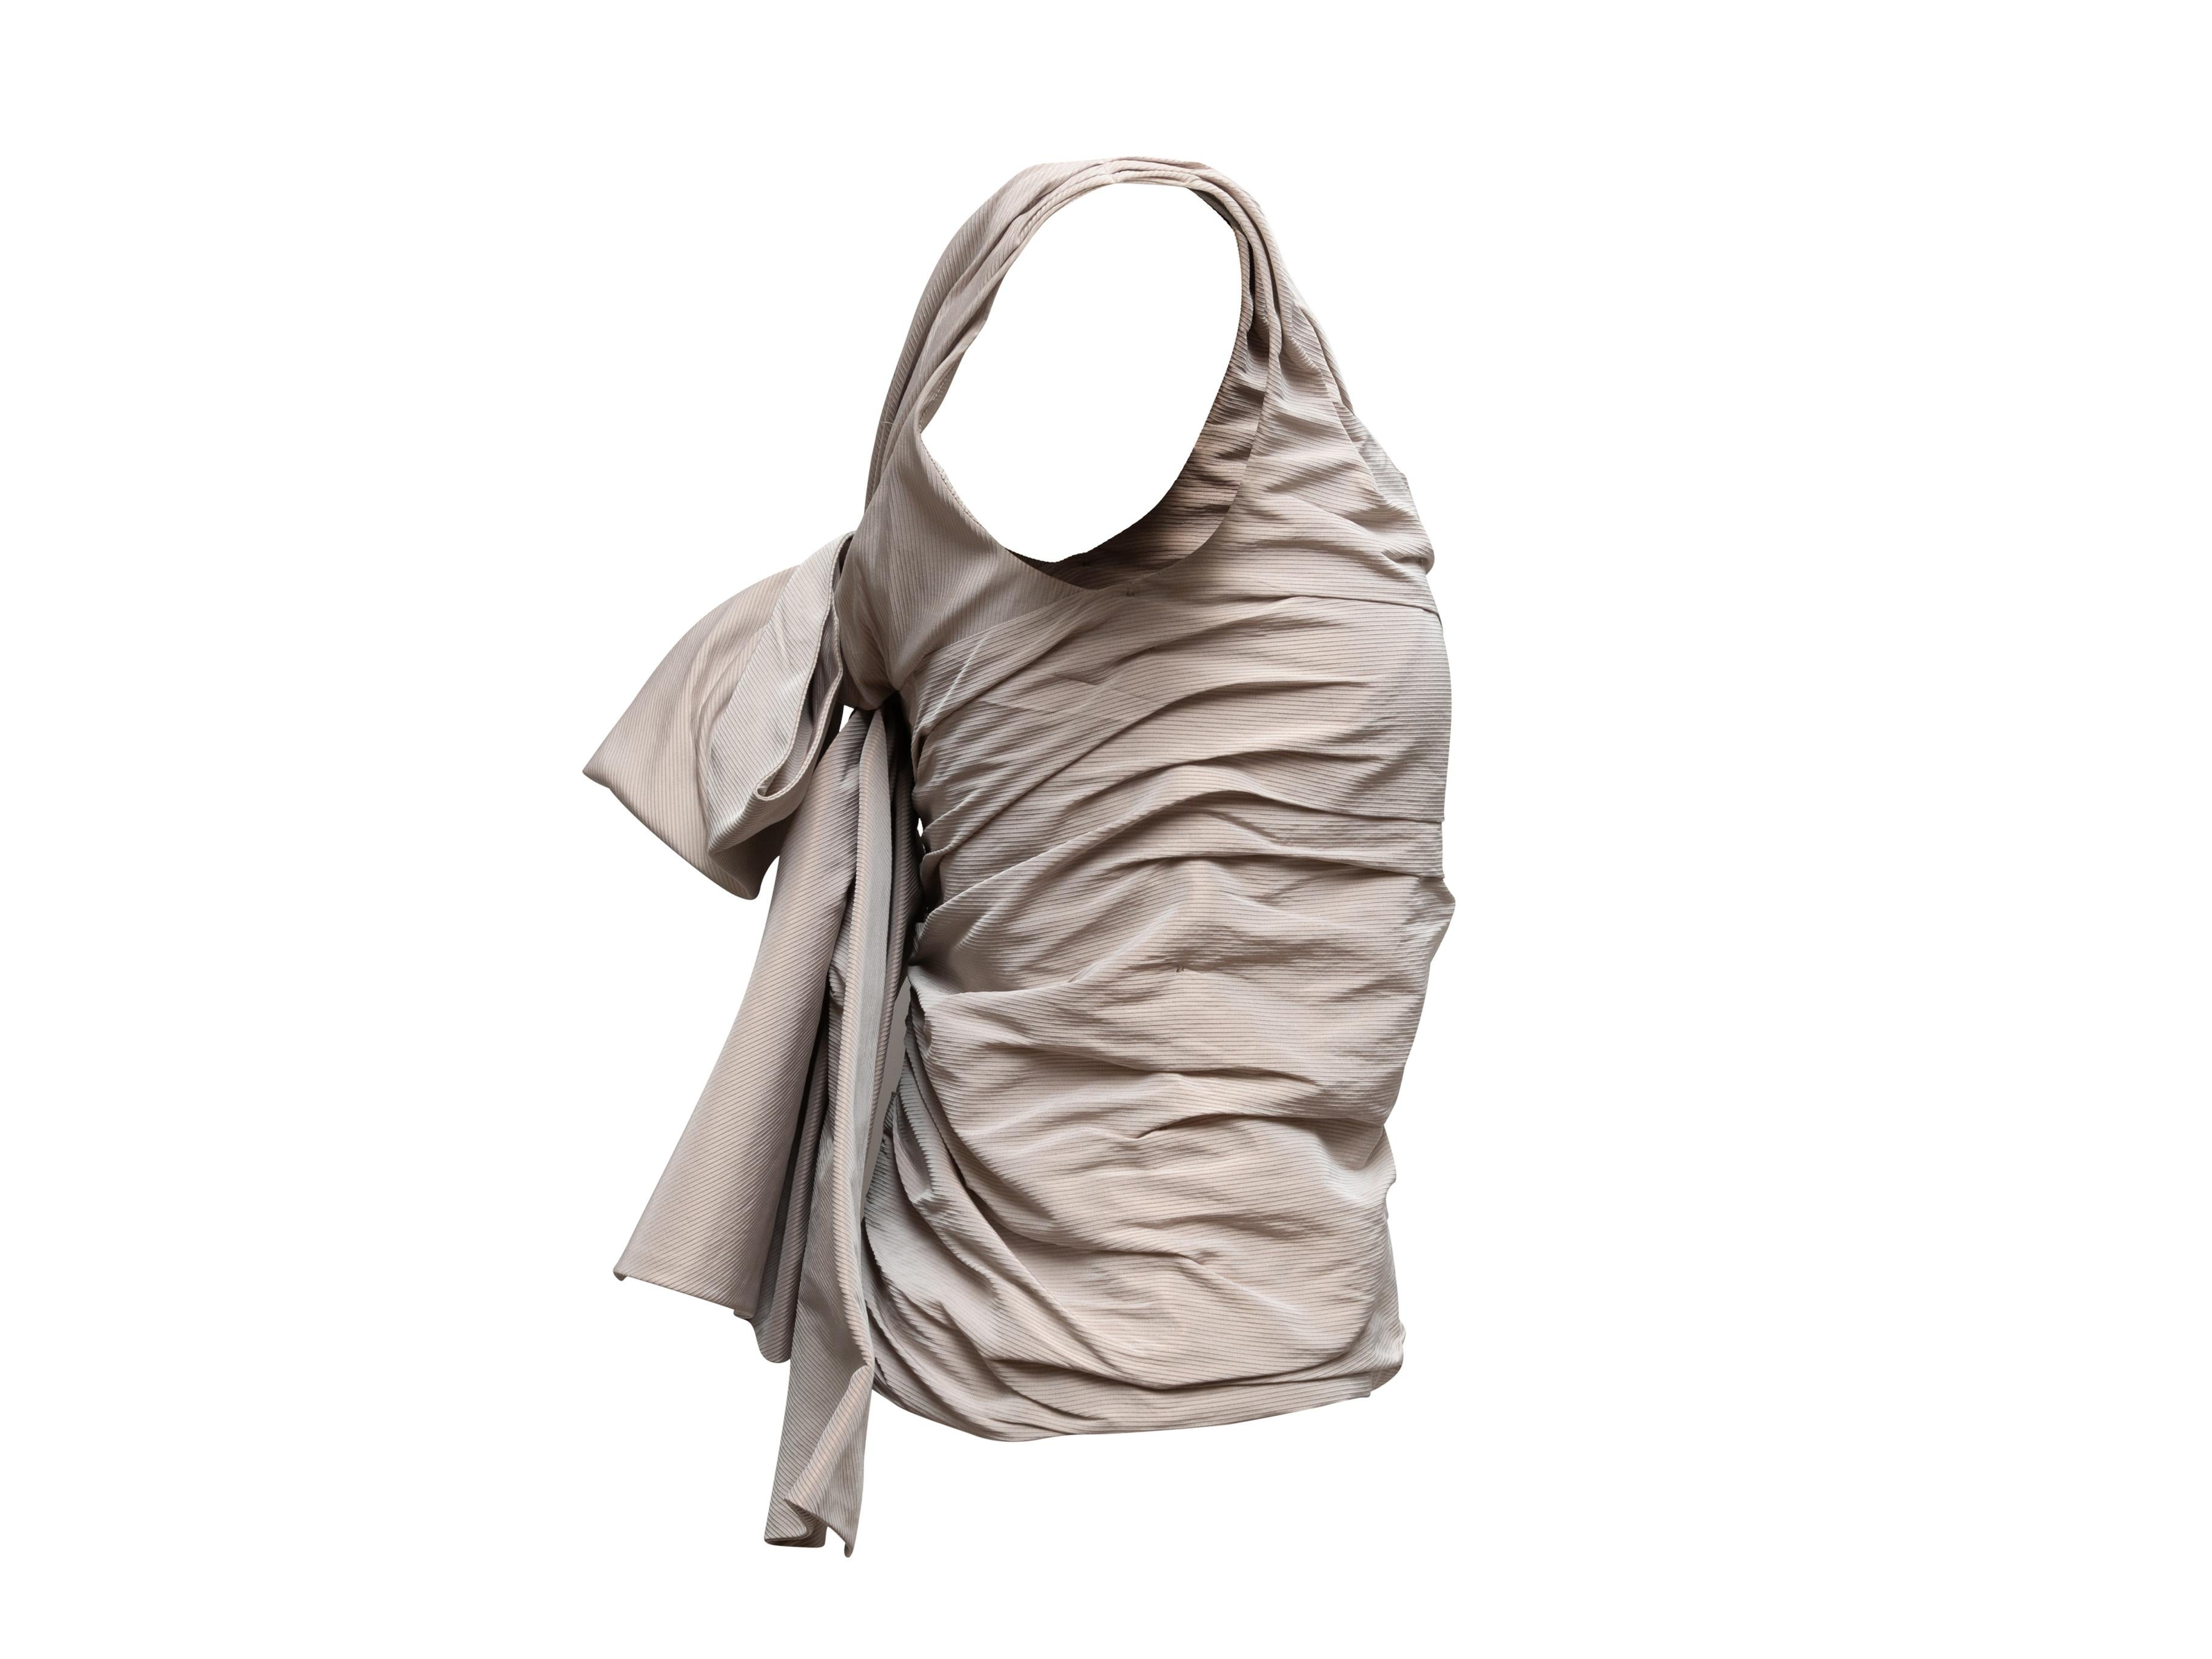 Grey sleeveless ruched top by Chloe. Look 6 in the Fall/Winter 2006 Collection. Round neckline. Bow accent at back. 28